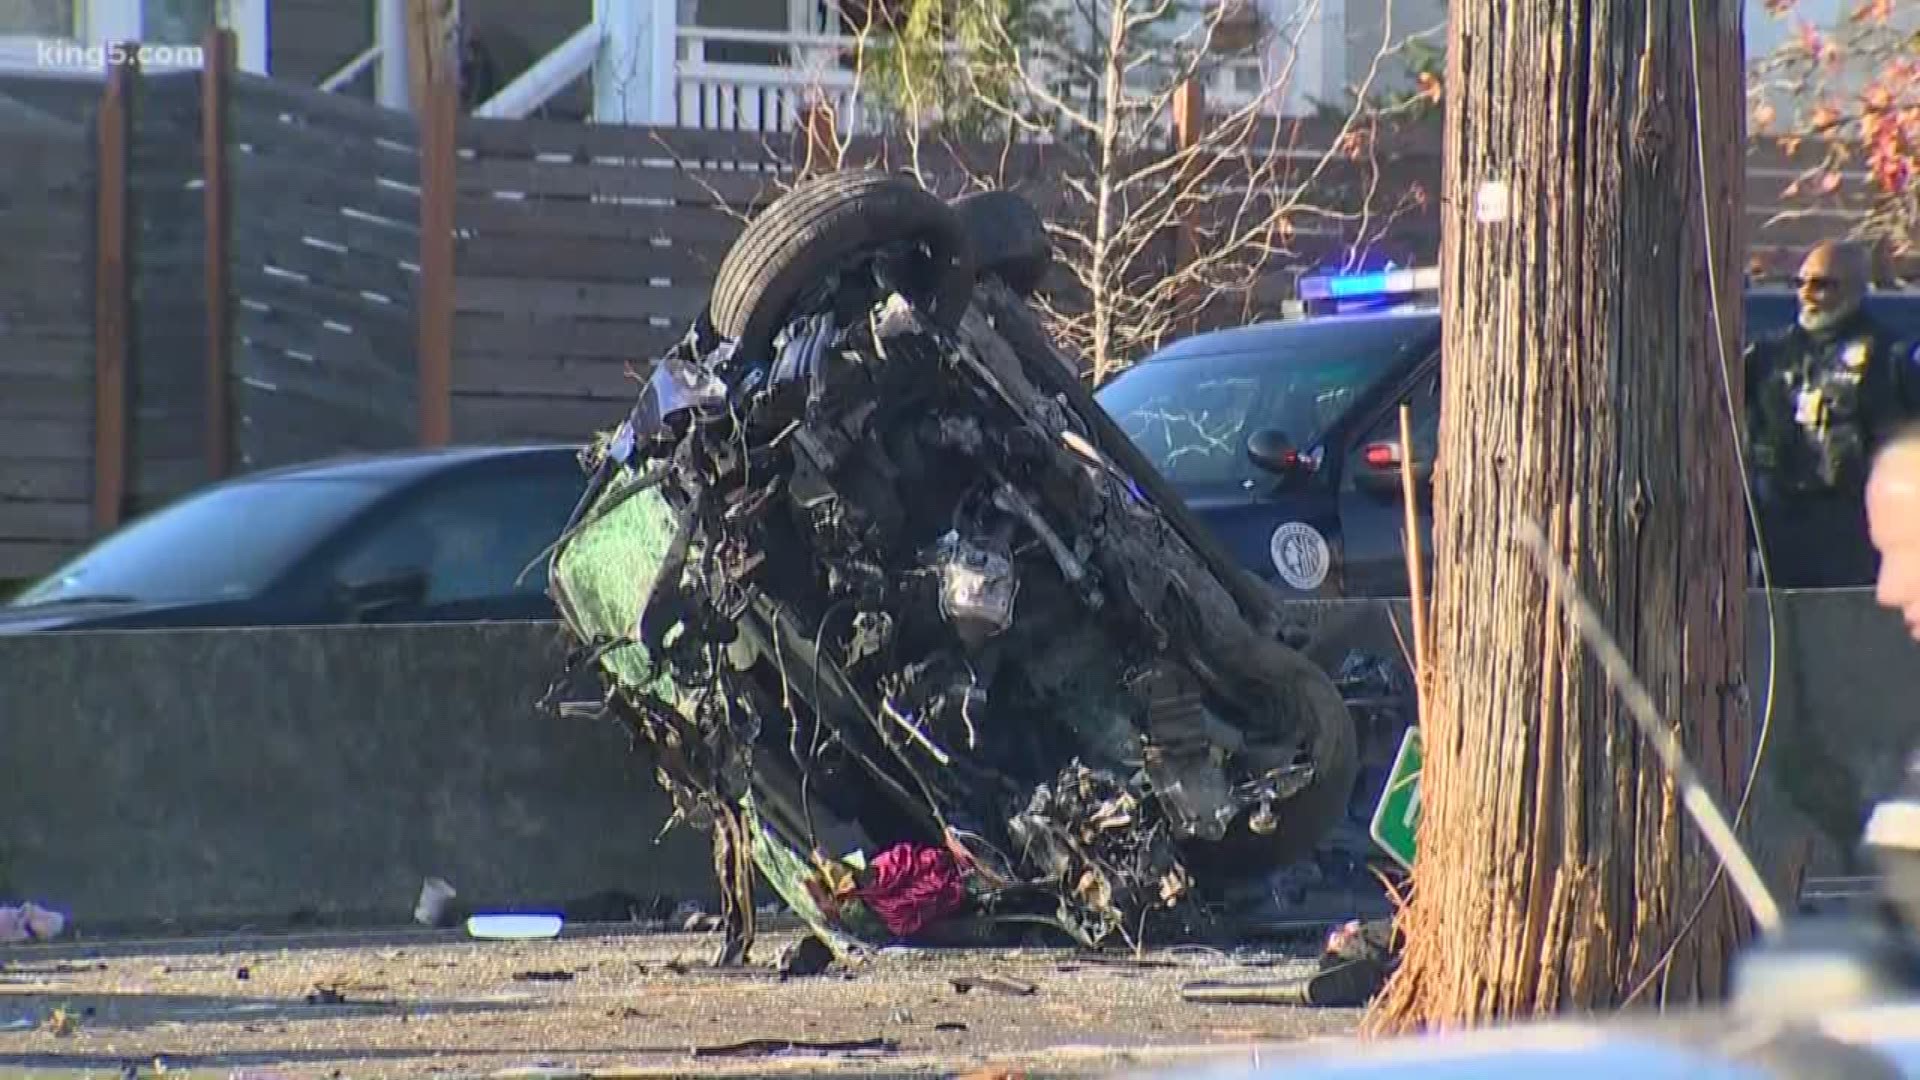 A second person has died after a rollover crash on Aurora Avenue Friday afternoon.